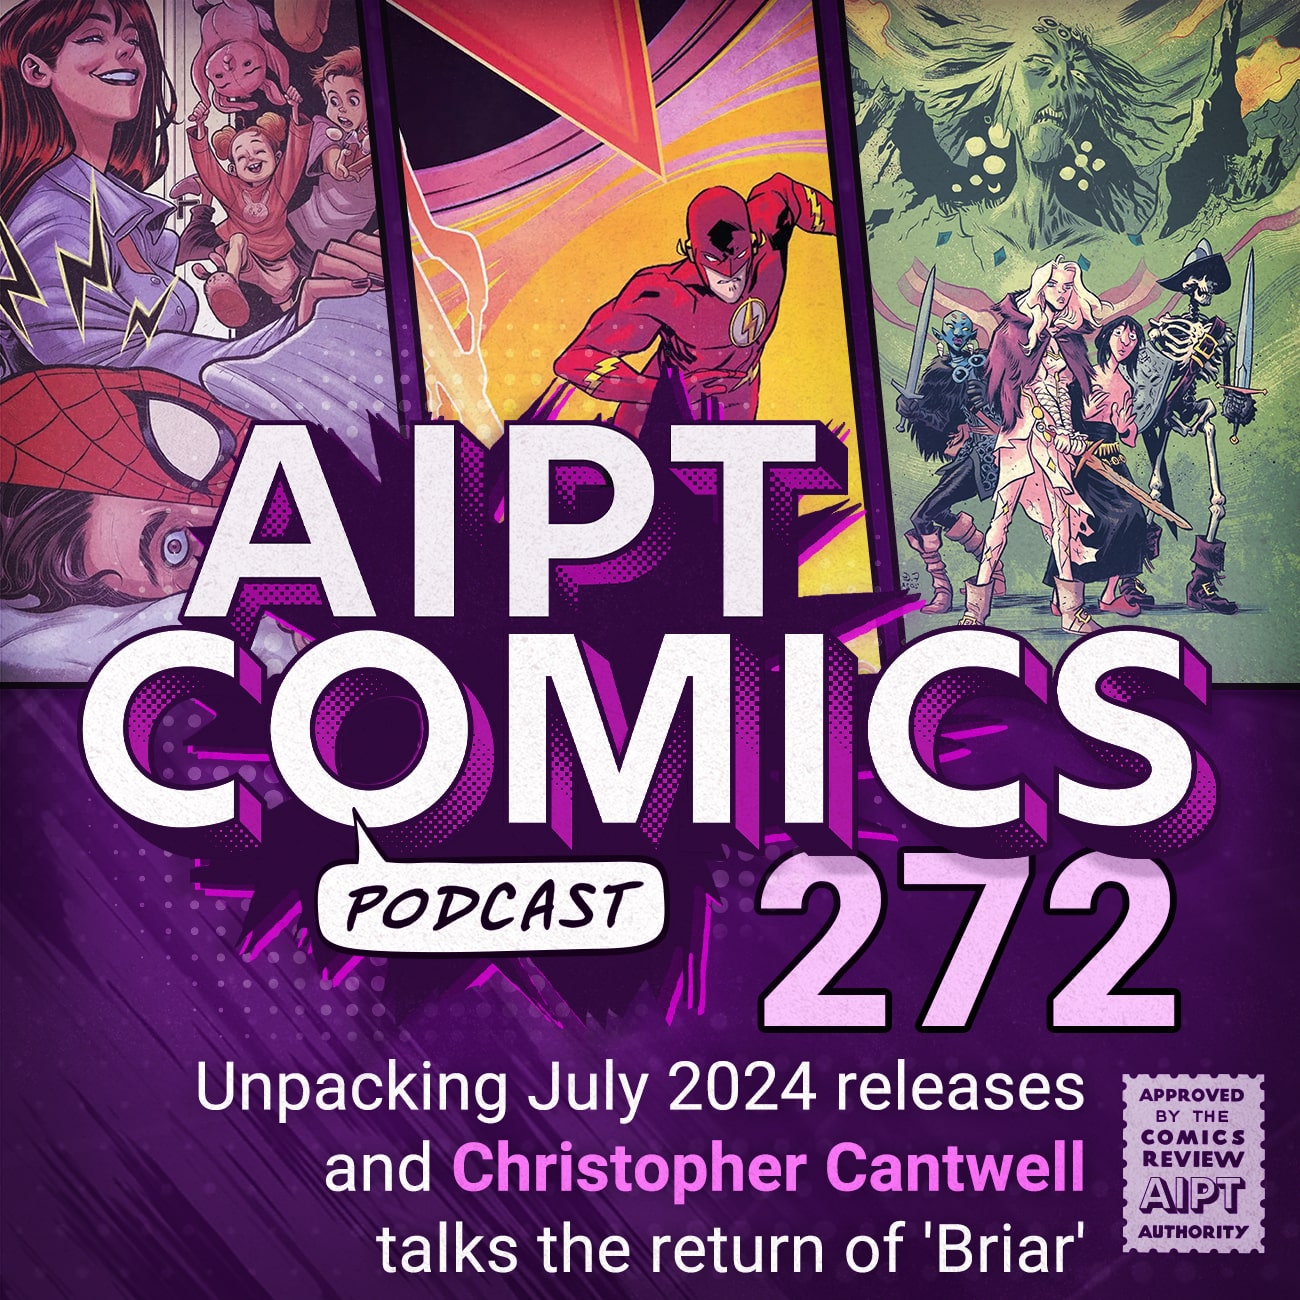 AIPT Comics Podcast Episode 272: Unpacking July 2024 releases and Christopher Cantwell talks the return of 'Briar'